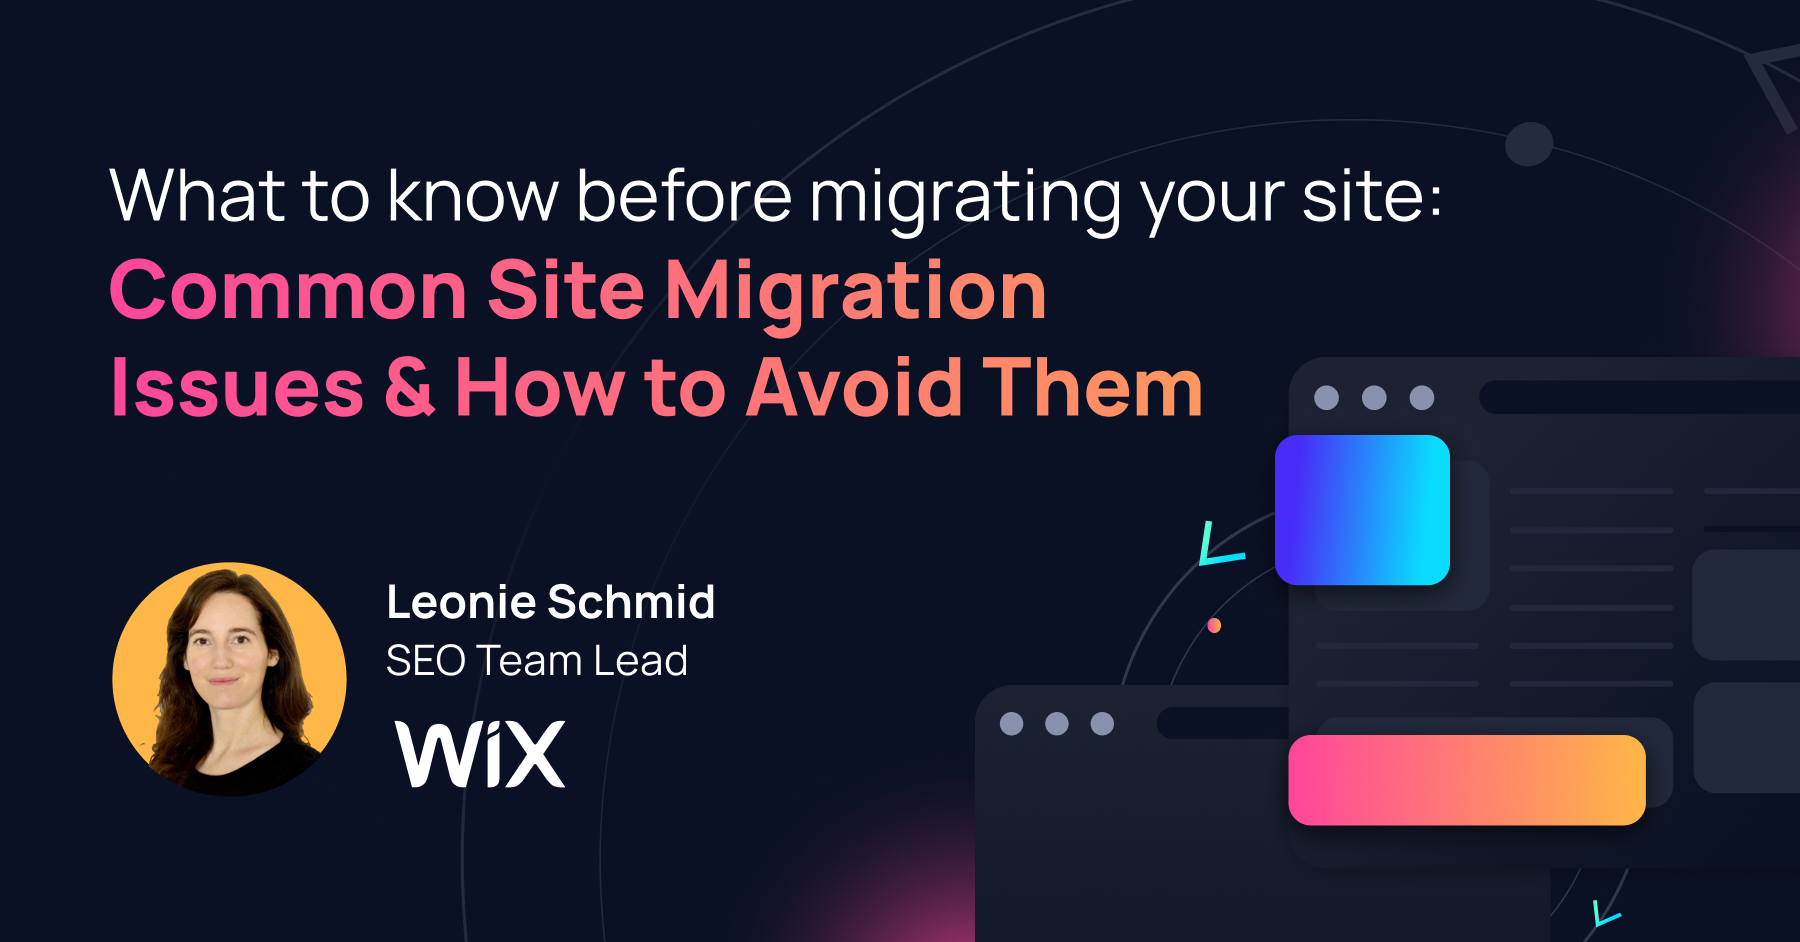 Wix Guest Post for Deepcrawl - What could go wrong during a site migration?